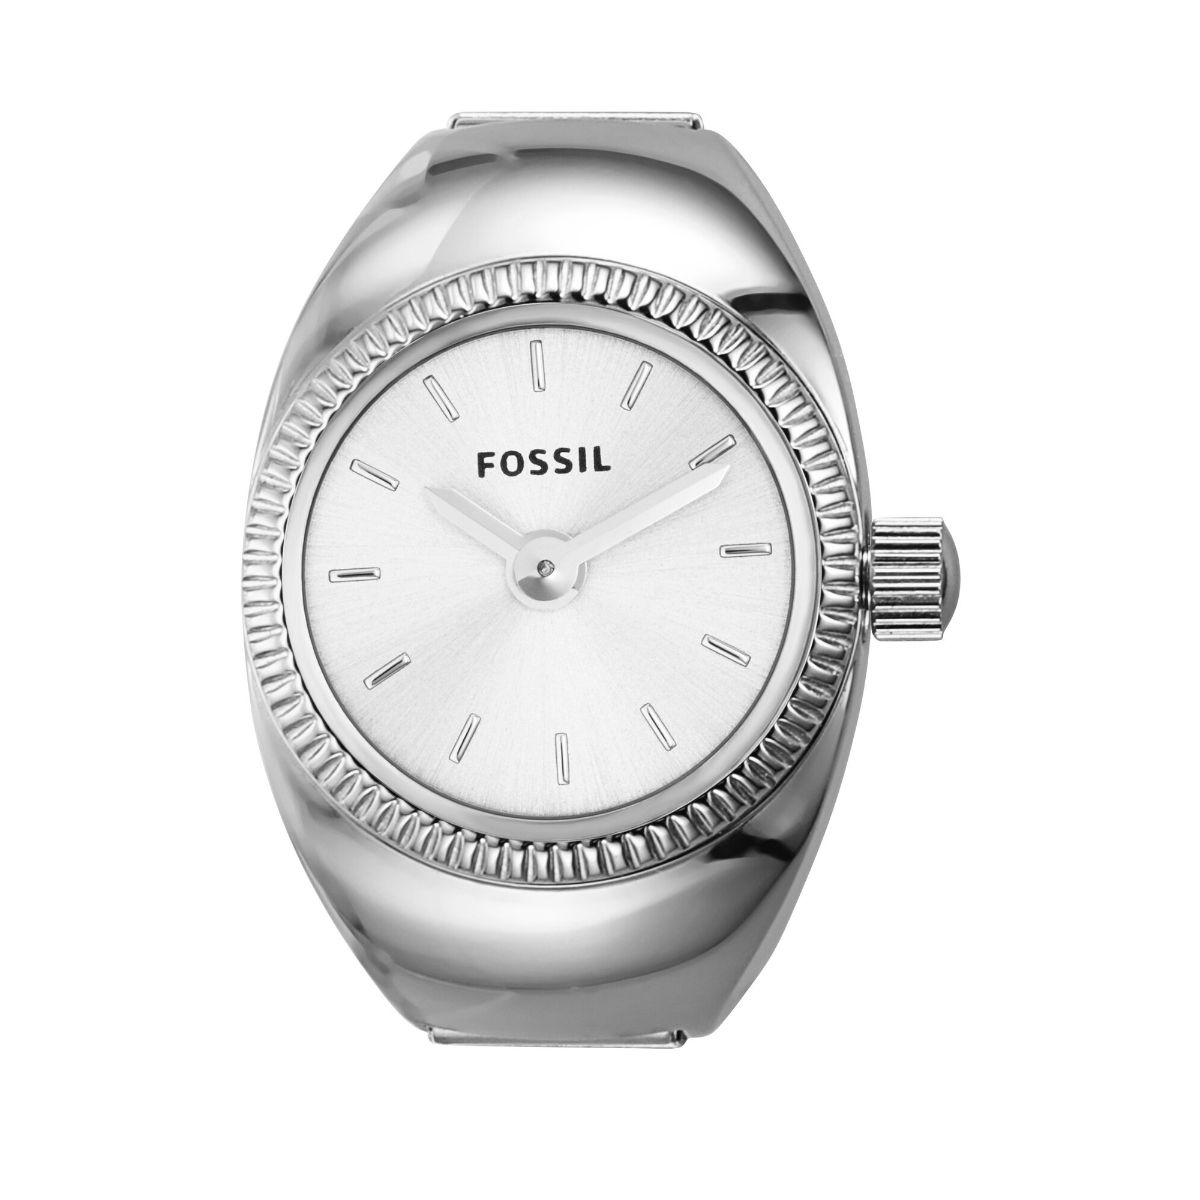 Fossil Ring Watch Silver Watch ES5245: Buy Fossil Ring Watch Silver ...